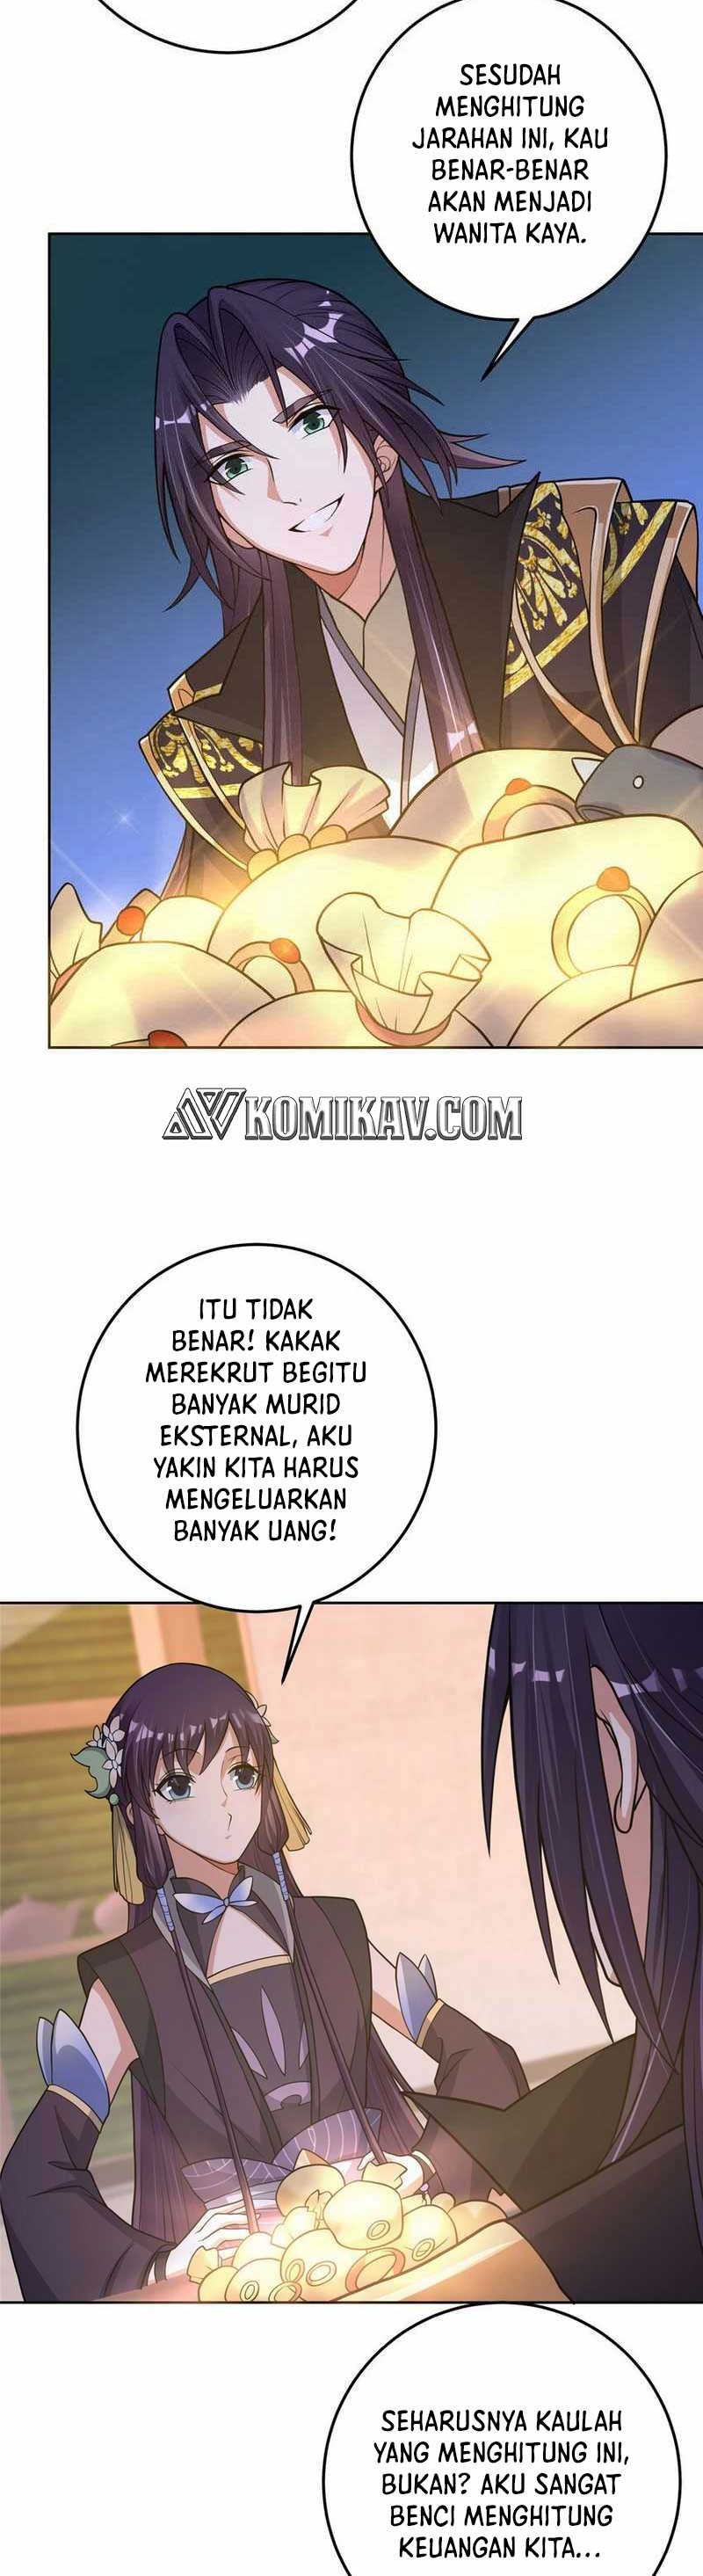 Keep A Low Profile, Sect Leader Chapter 172 Bahasa Indonesia